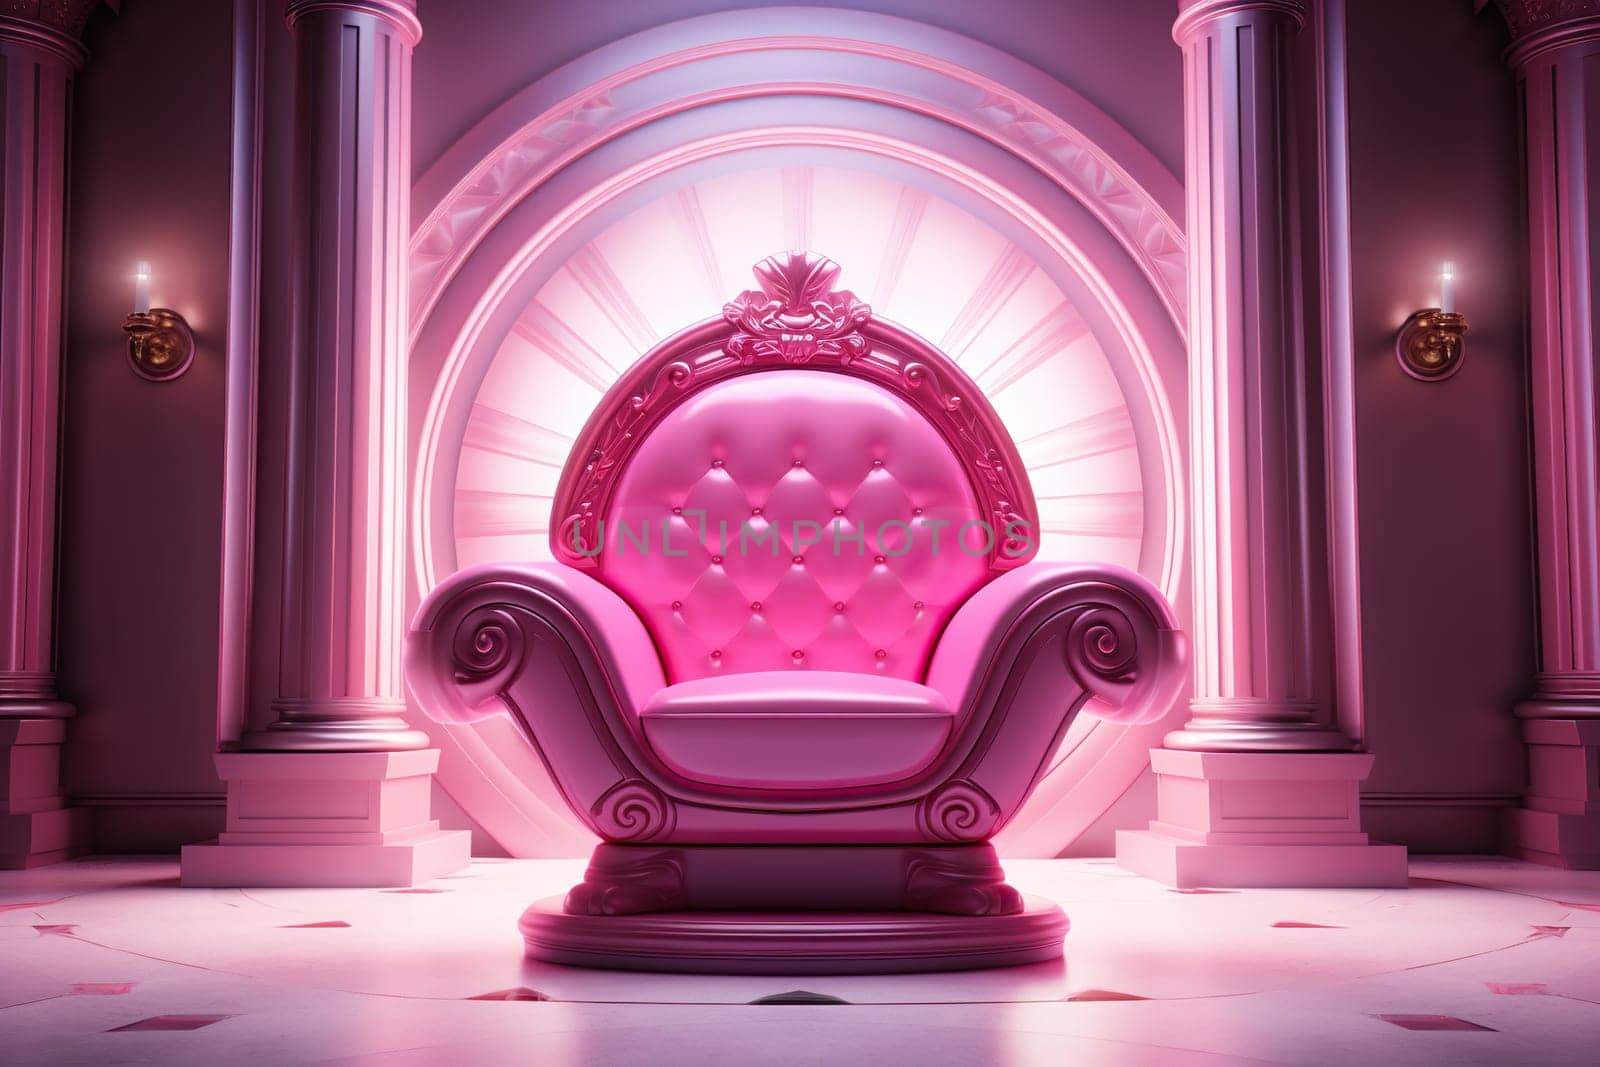 Luxurious pink chair with pink lighting and neon illumination in a spacious room.